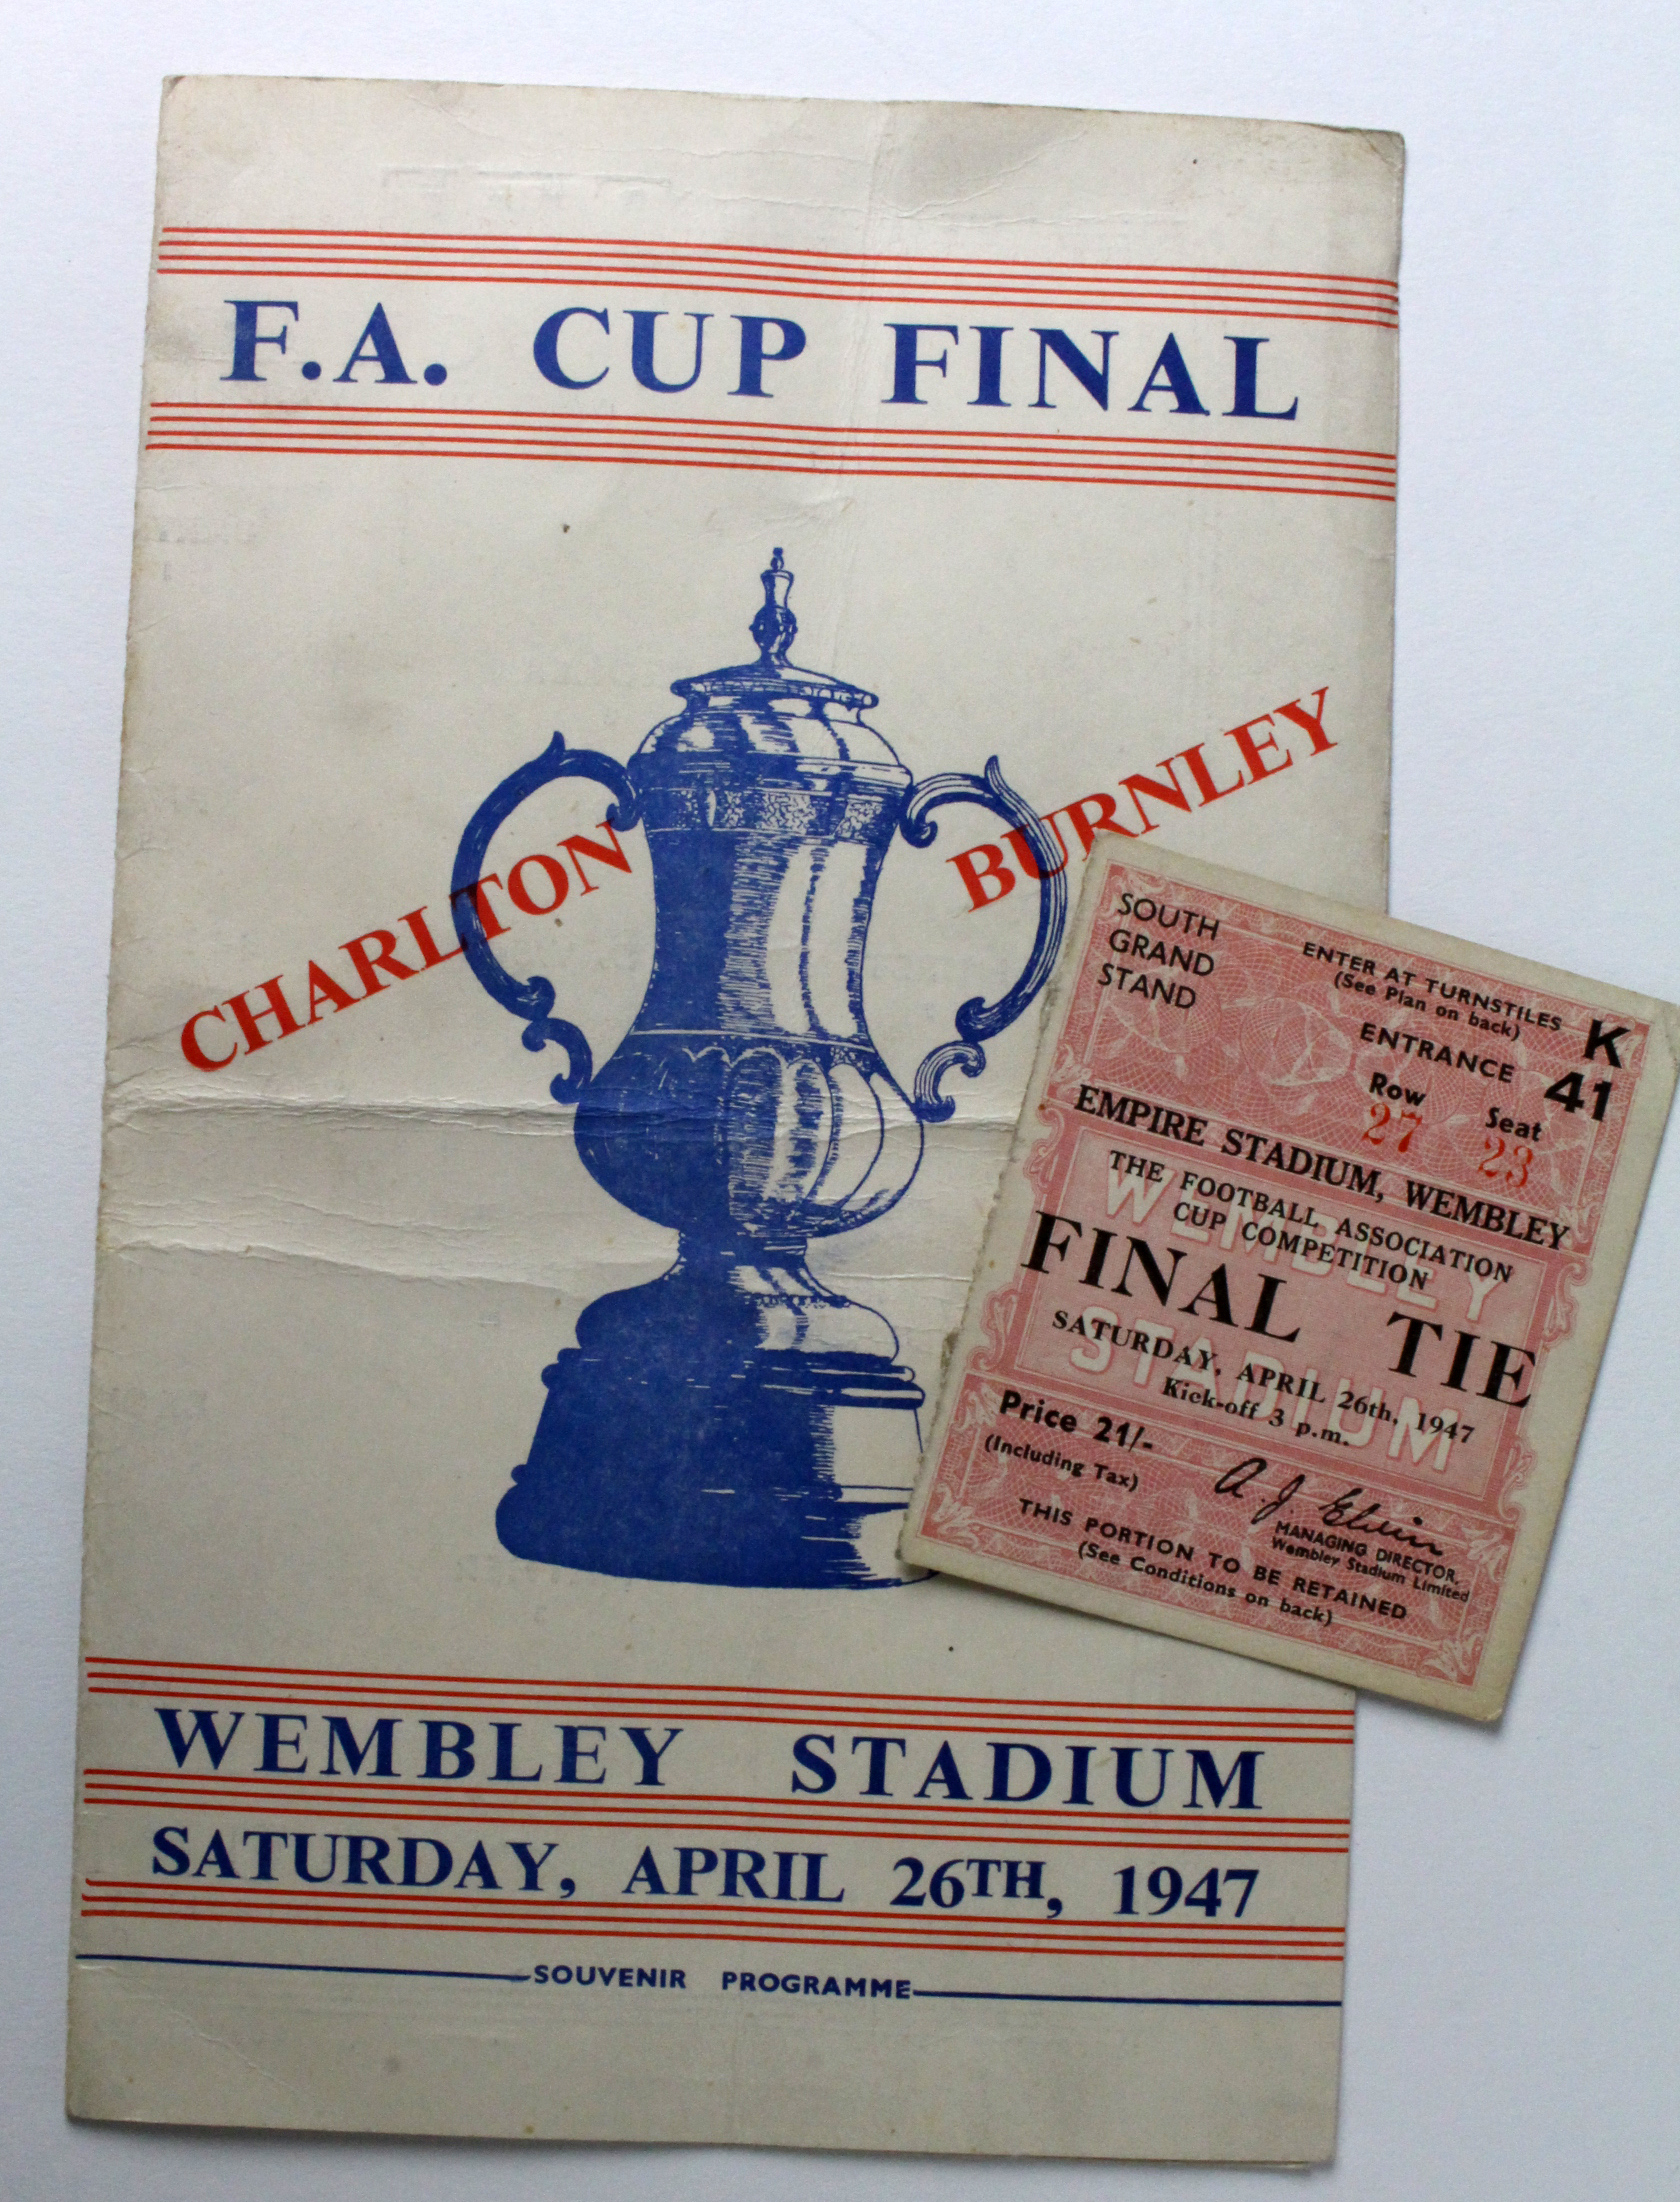 Charlton v Burnley 26th April 1947 FA Cup Final 'Souvenir' programme, with original Ticket for South